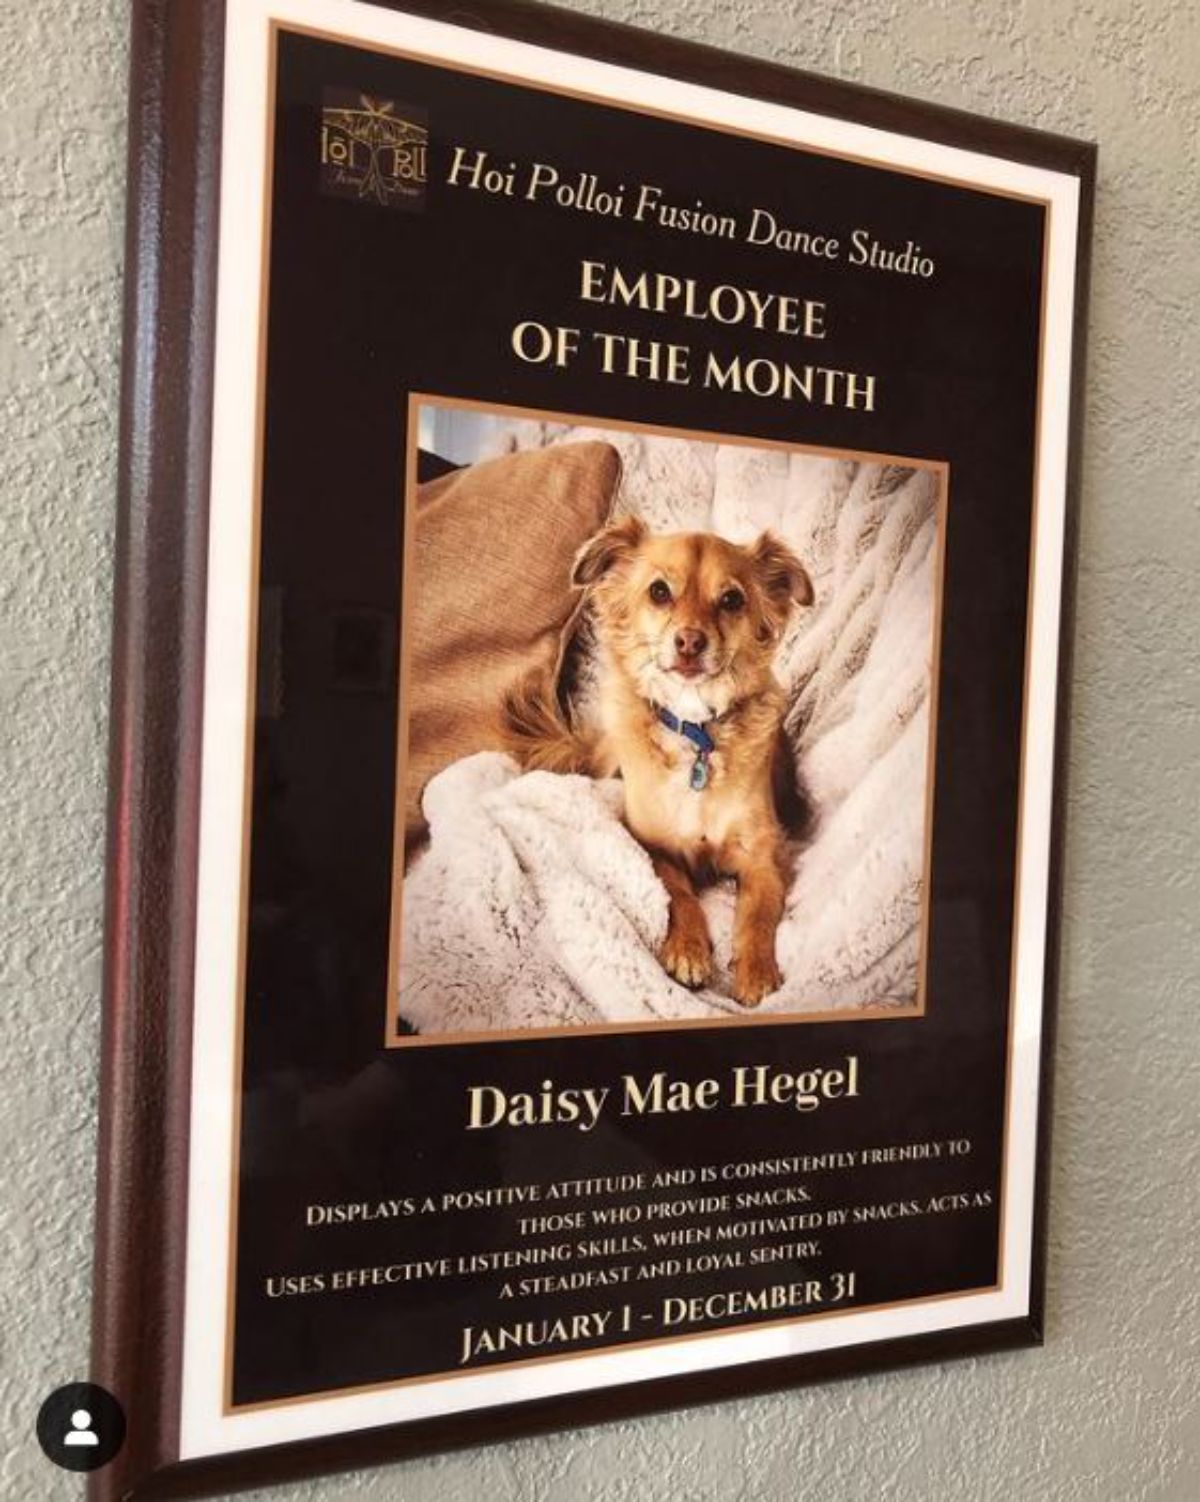 framed photo of brown and white dog in an employee of the month sign